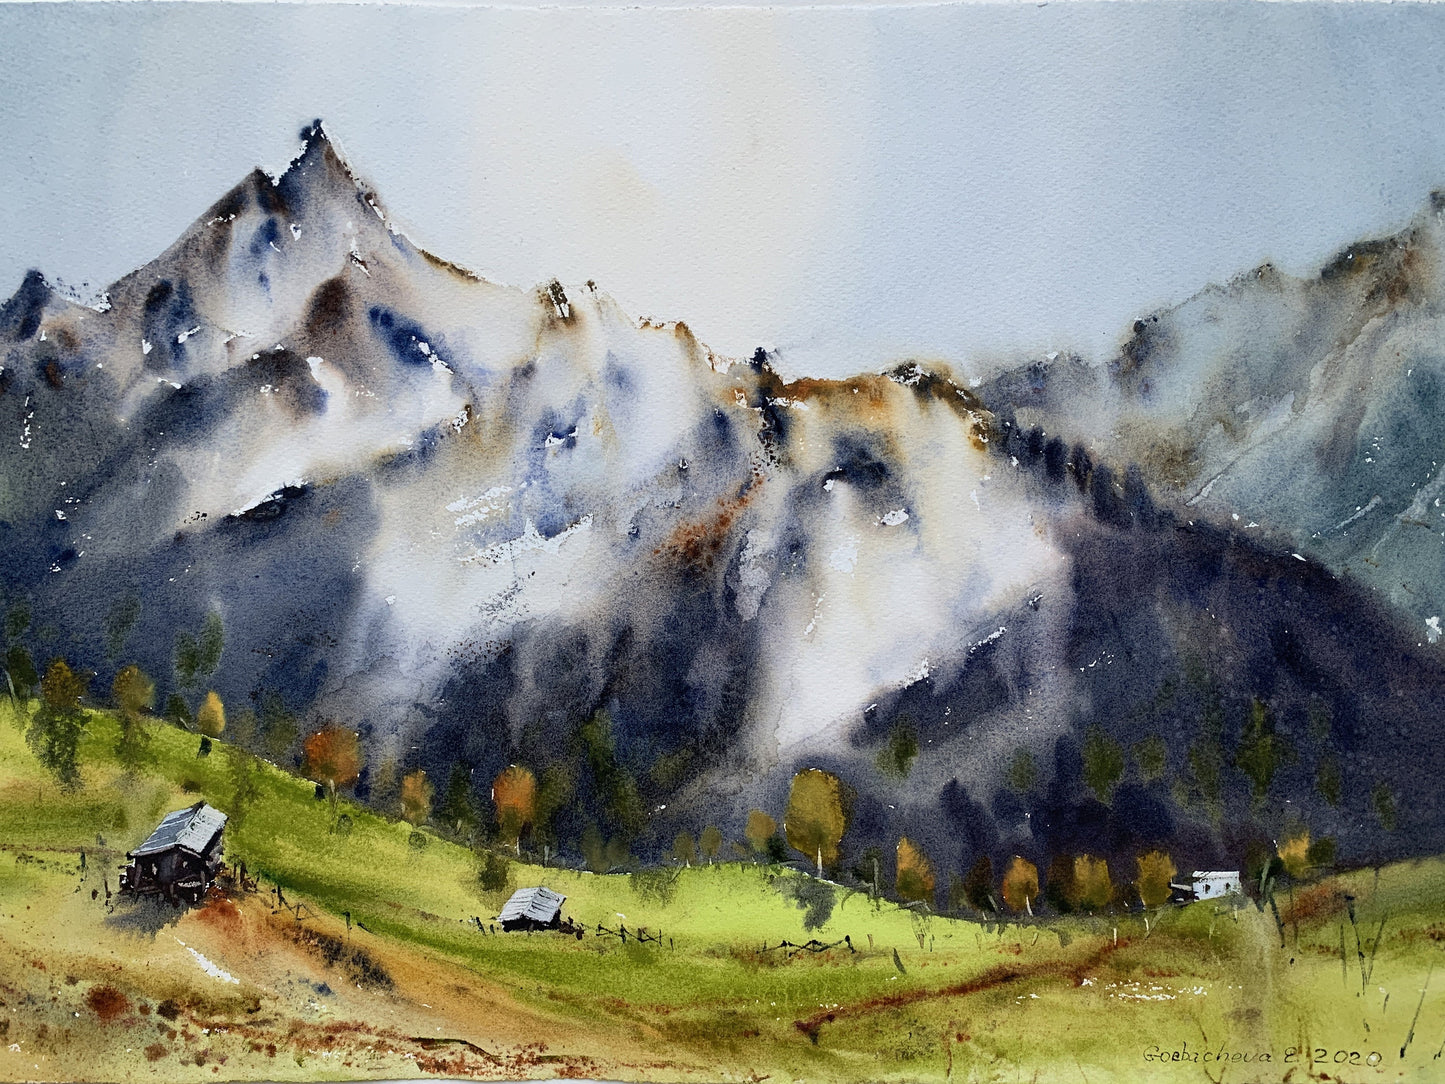 Mountain Village Print, Landscape Wall Art, Country House Art Decor, Watercolor Scenery Painting on Canvas, Gray, Green